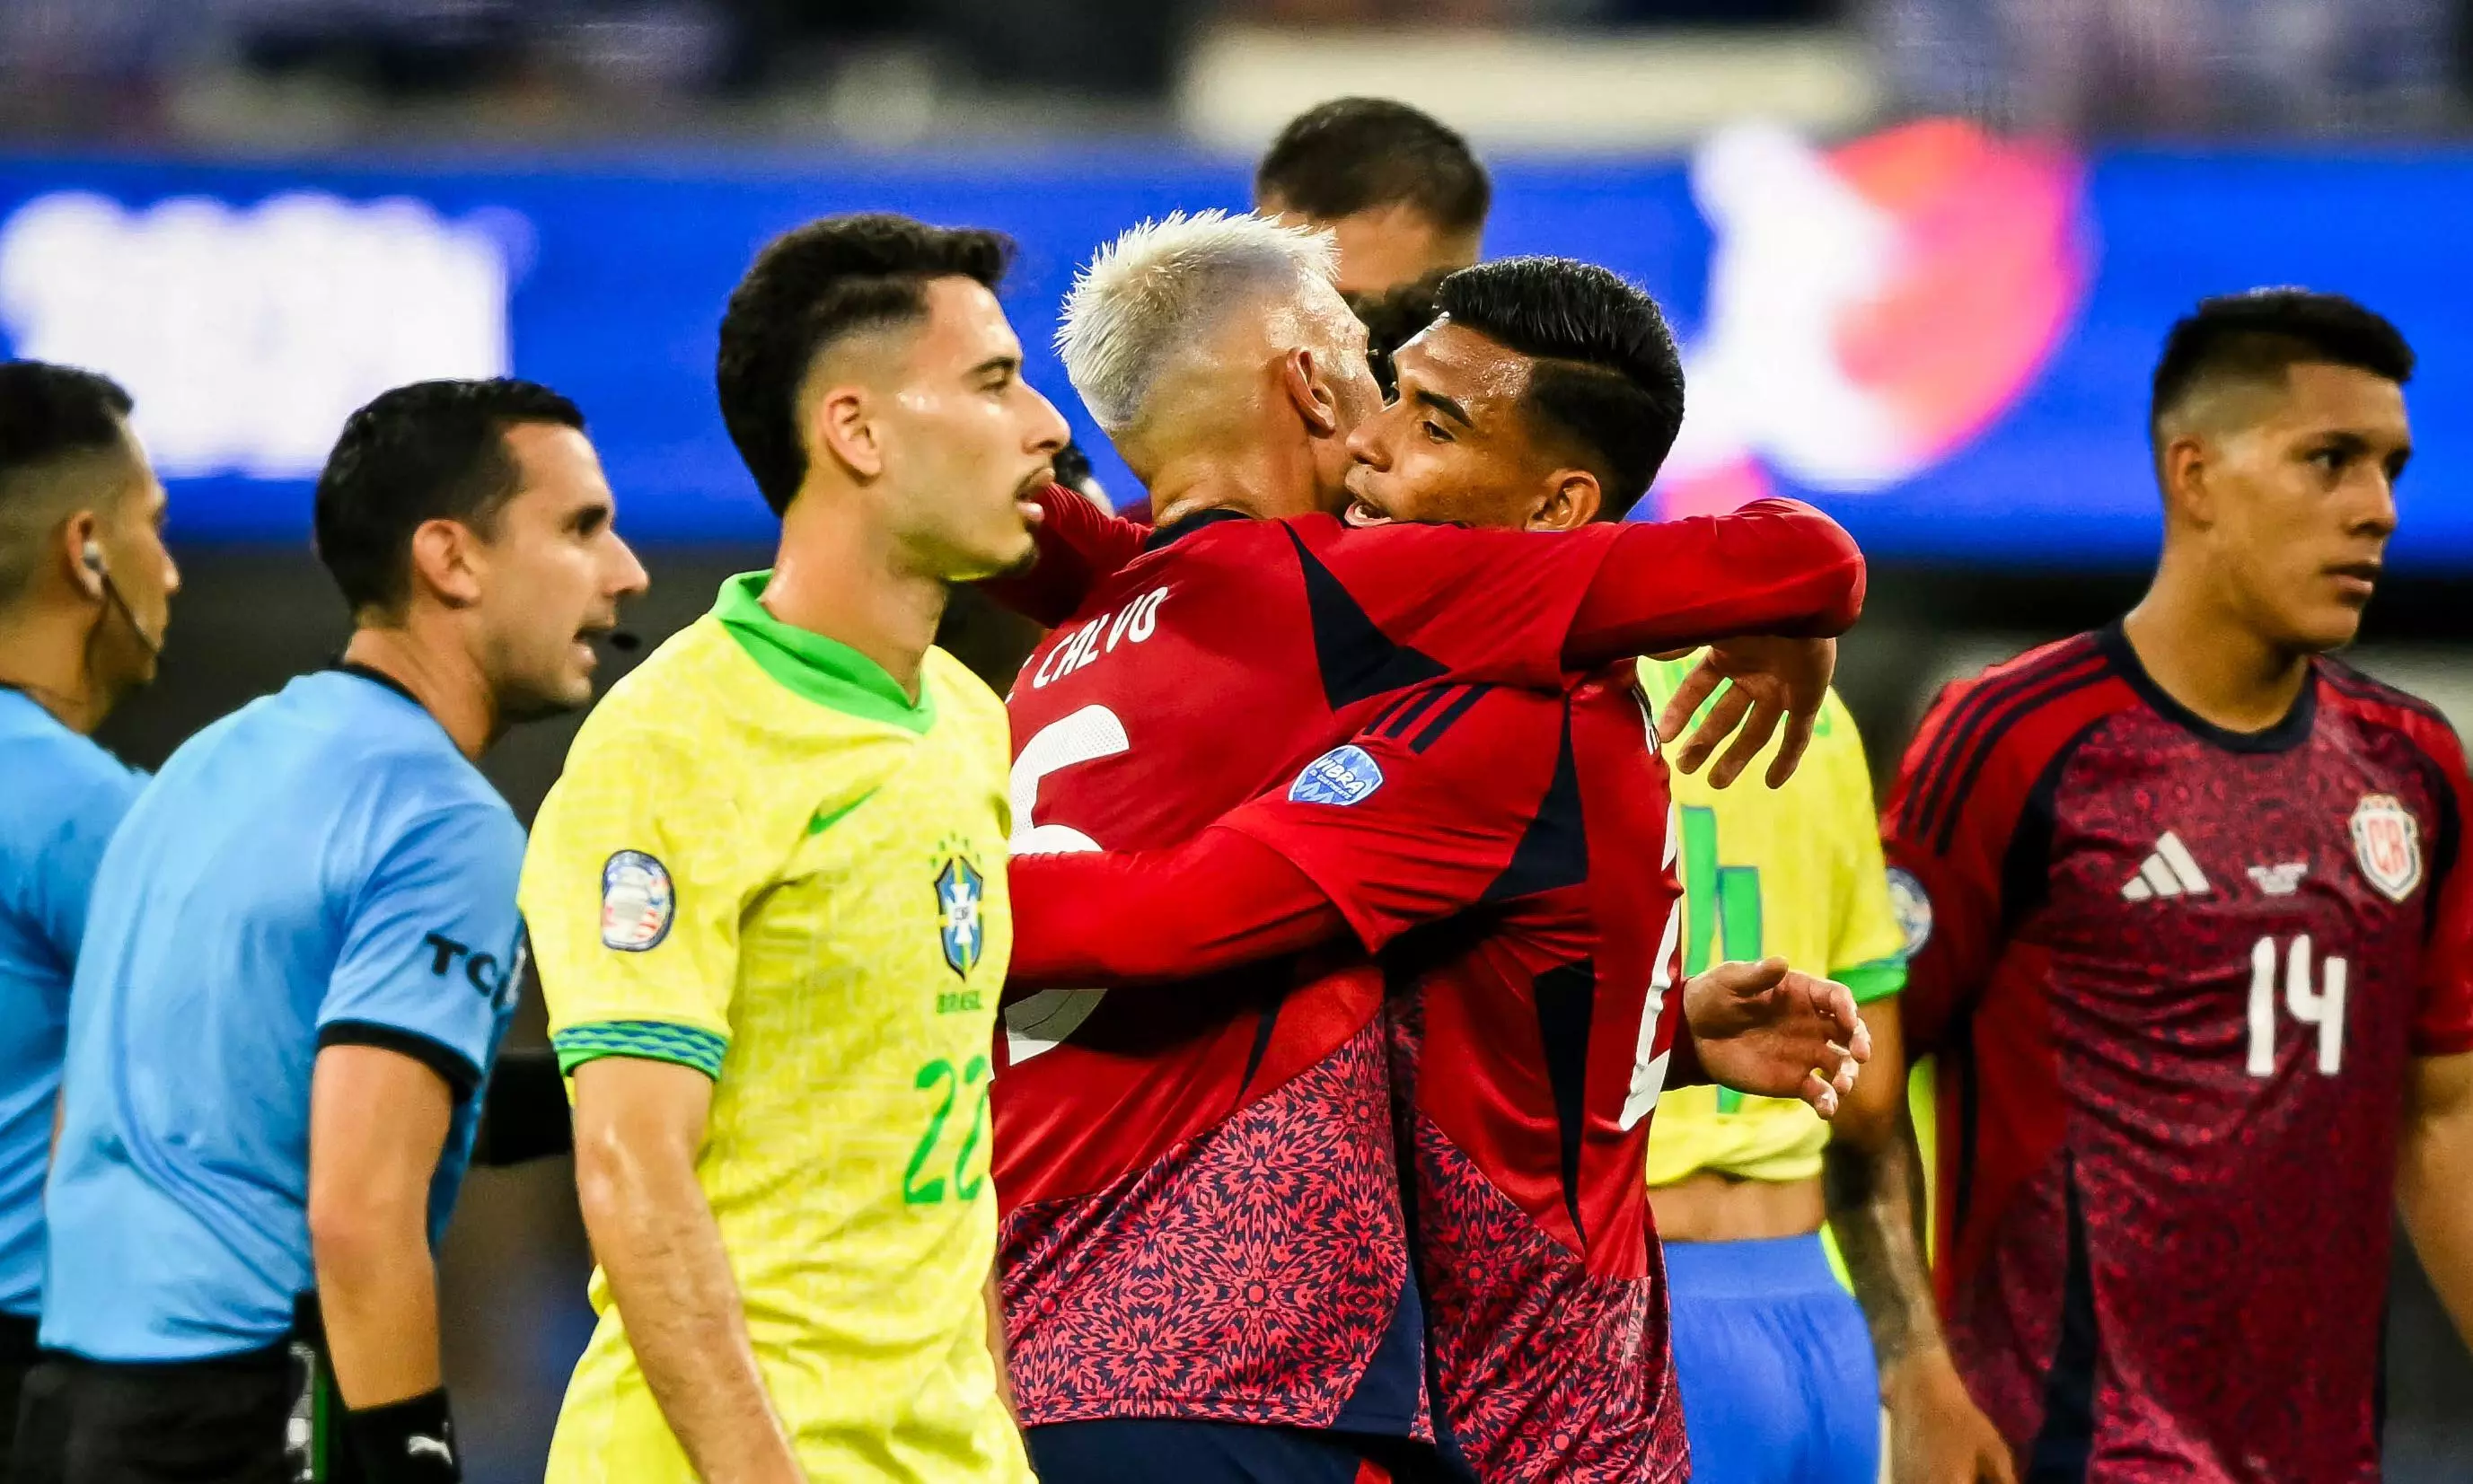 Copa America: Brazil held to 0-0 draw by Costa Rica in stunning group match